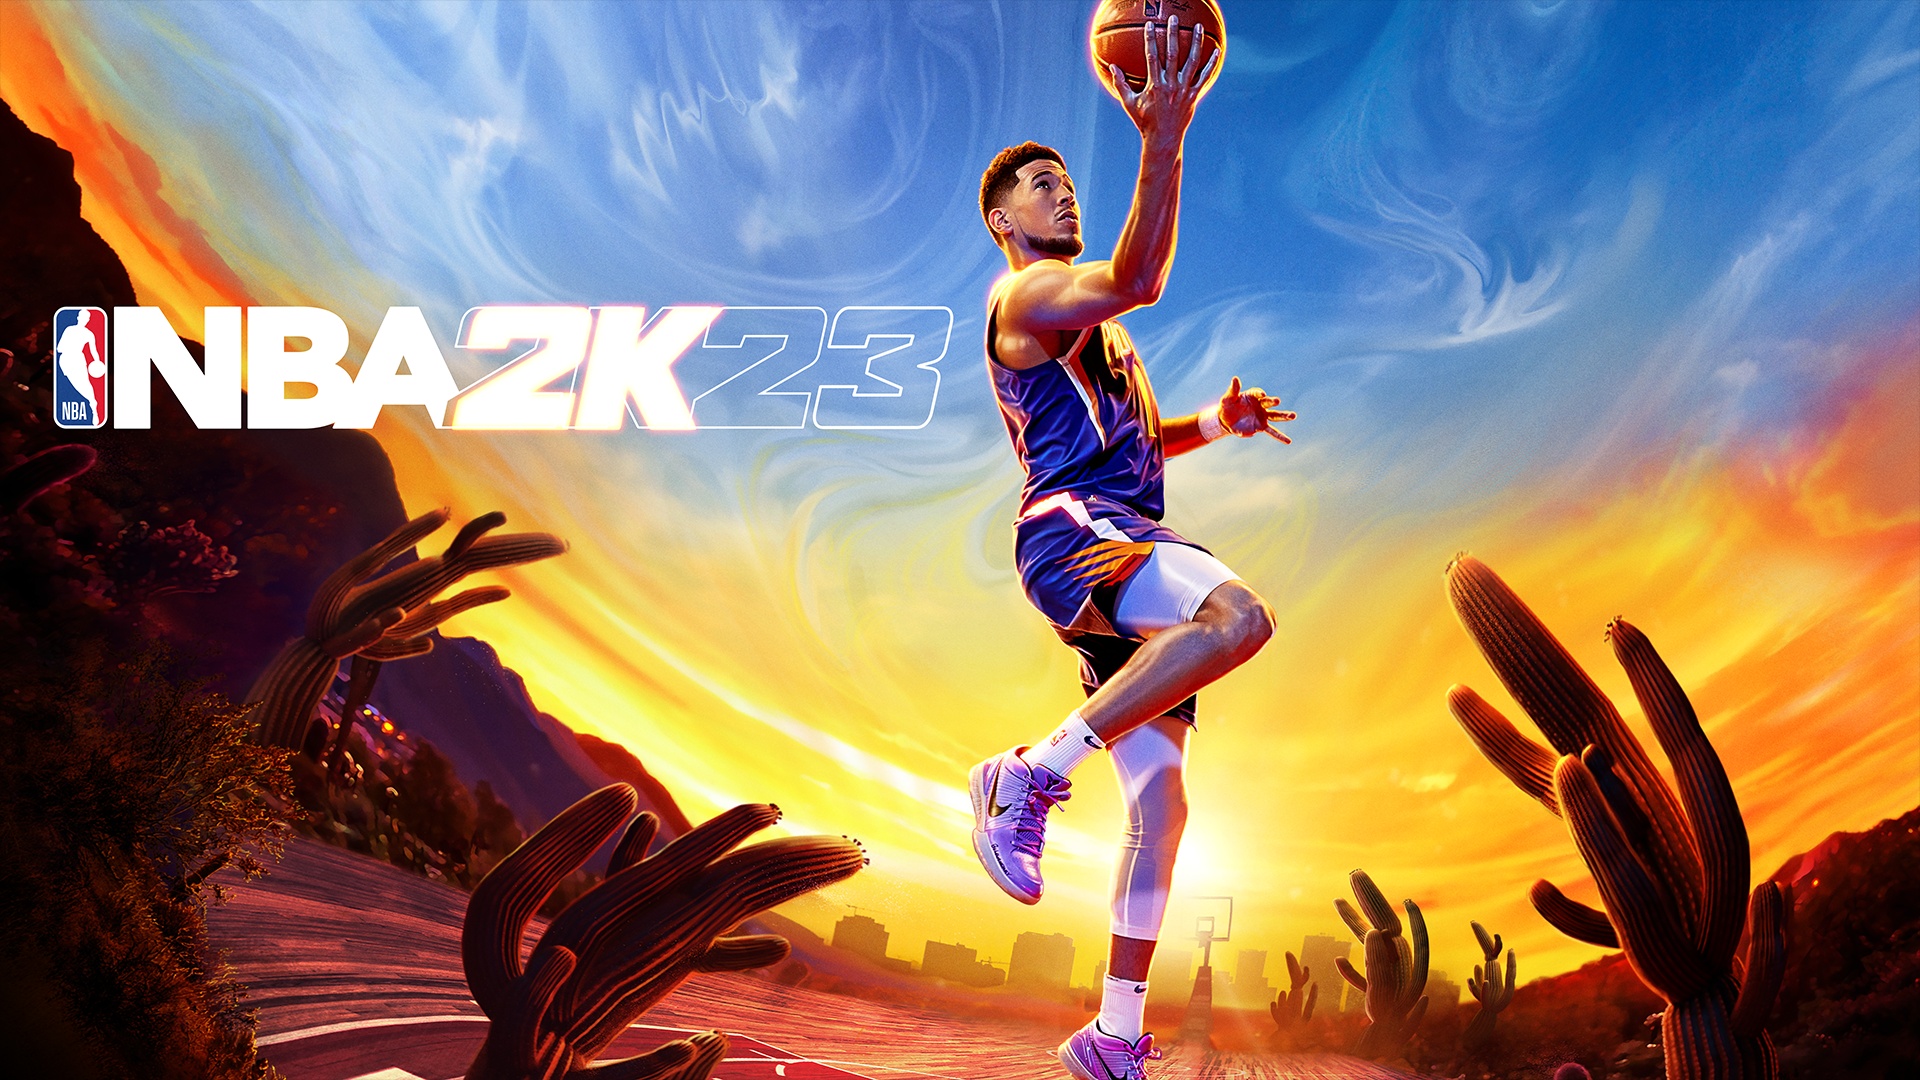 How Will You Answer the Call? NBA 2K23 Now Available - Xbox Wire